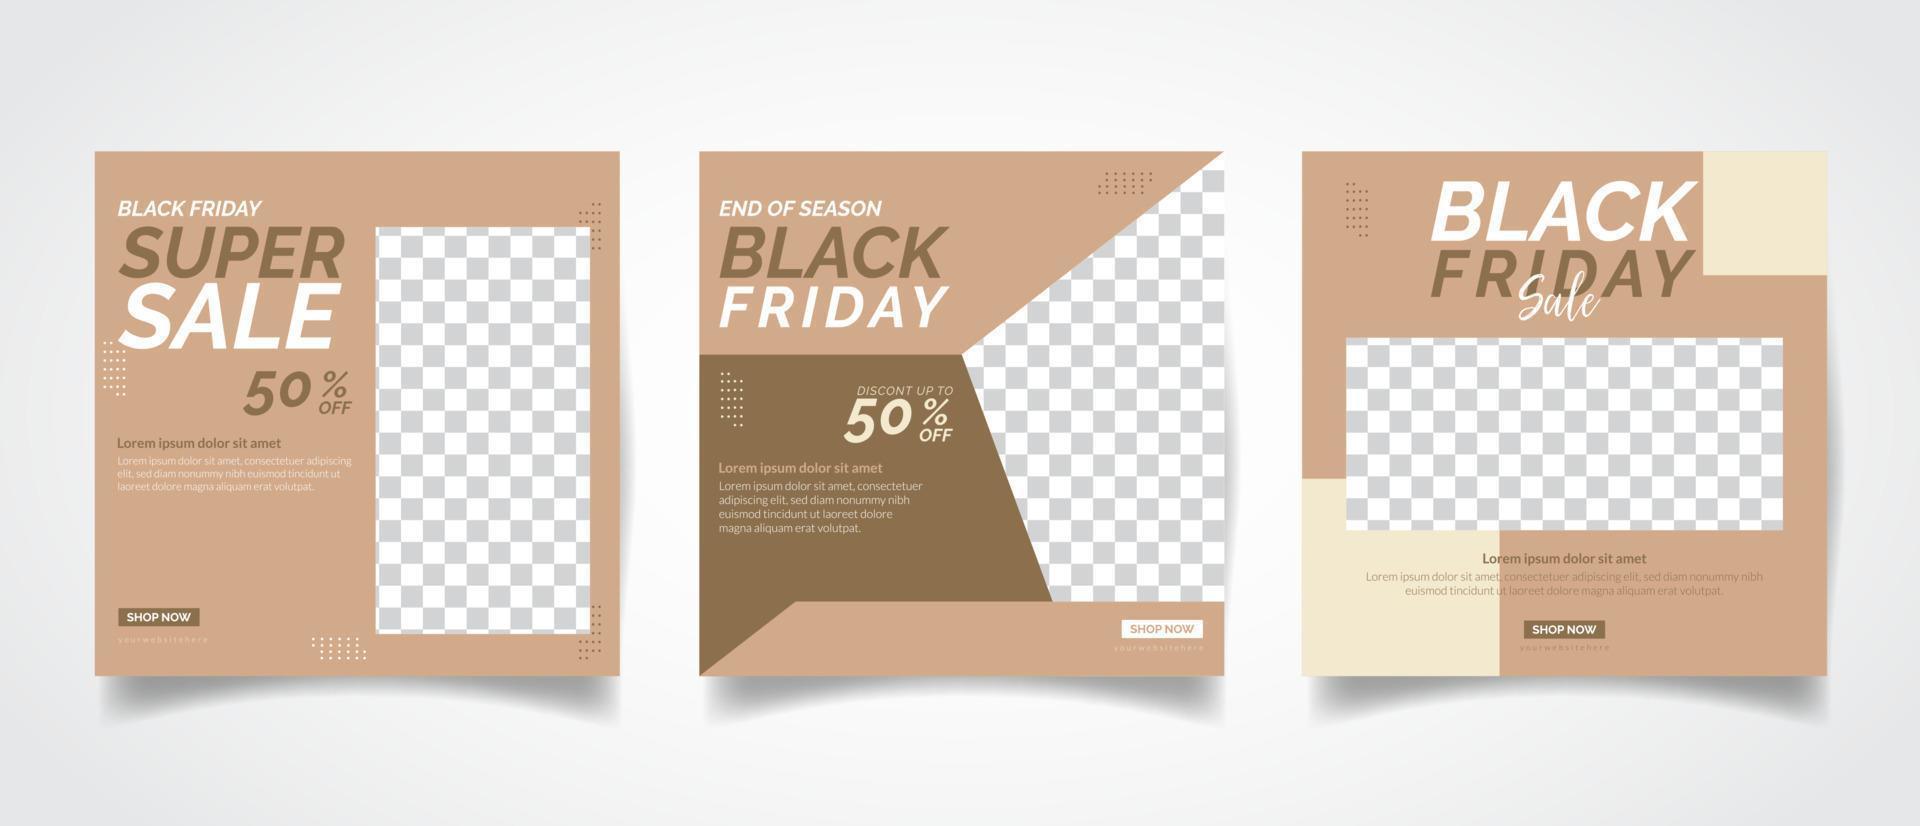 black friday Sale banner template design. Set of social media web banners for shopping, sale, product promotion. vector